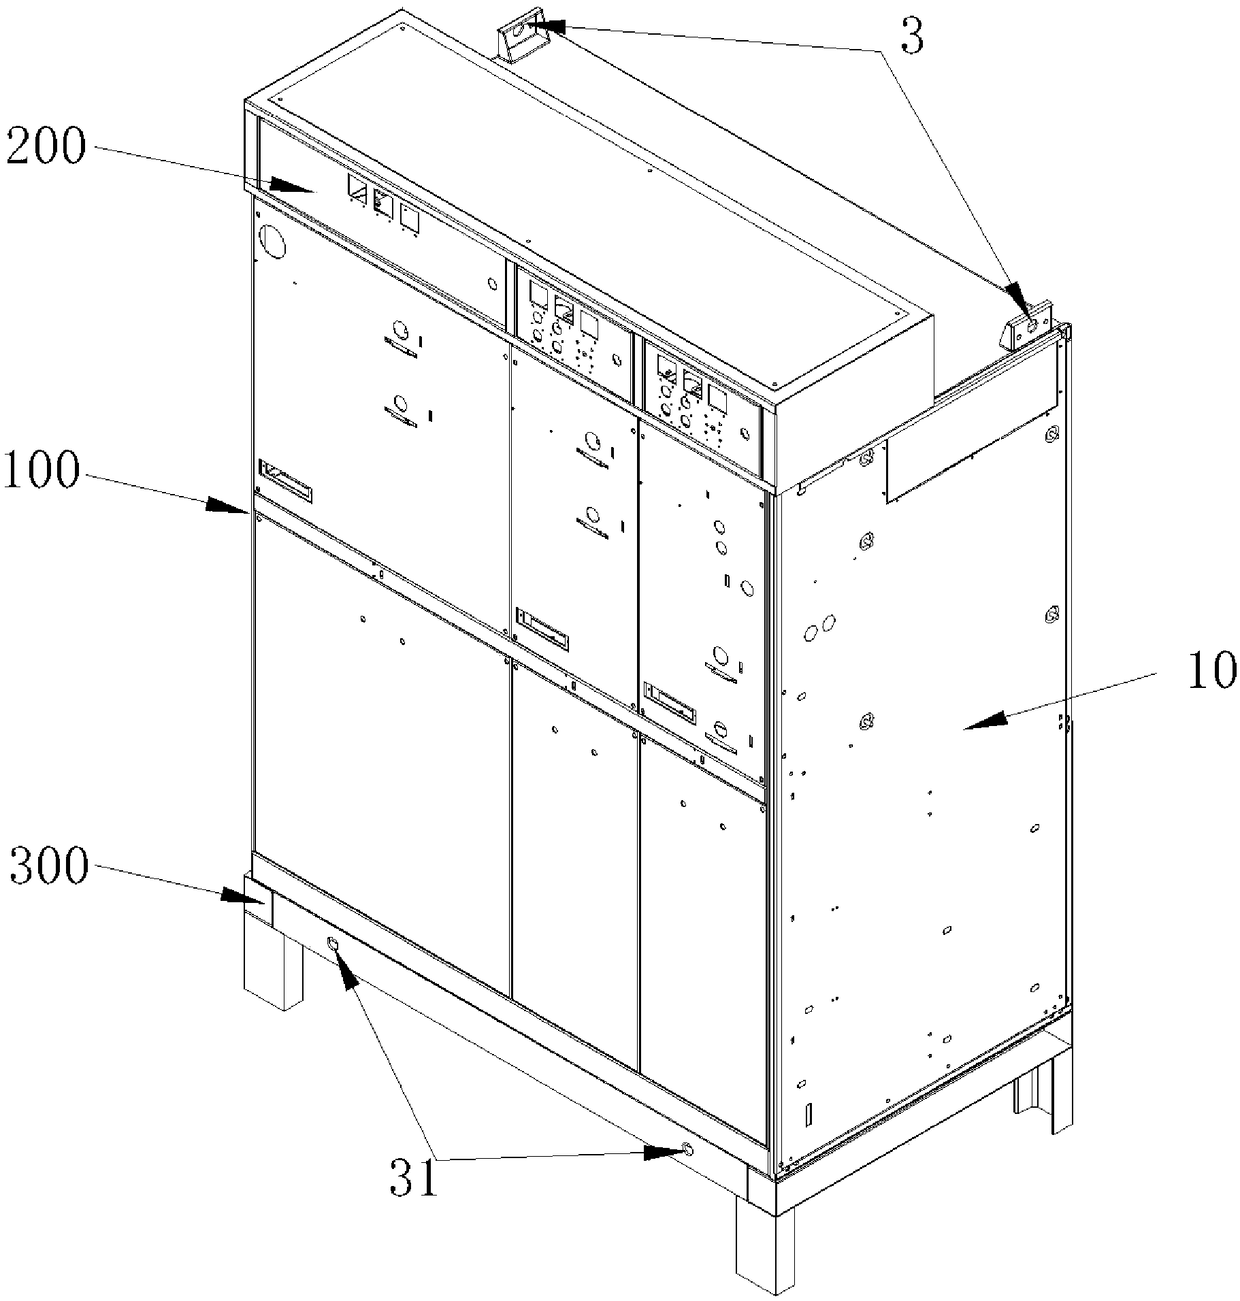 Primary and secondary fused inflatable cabinet